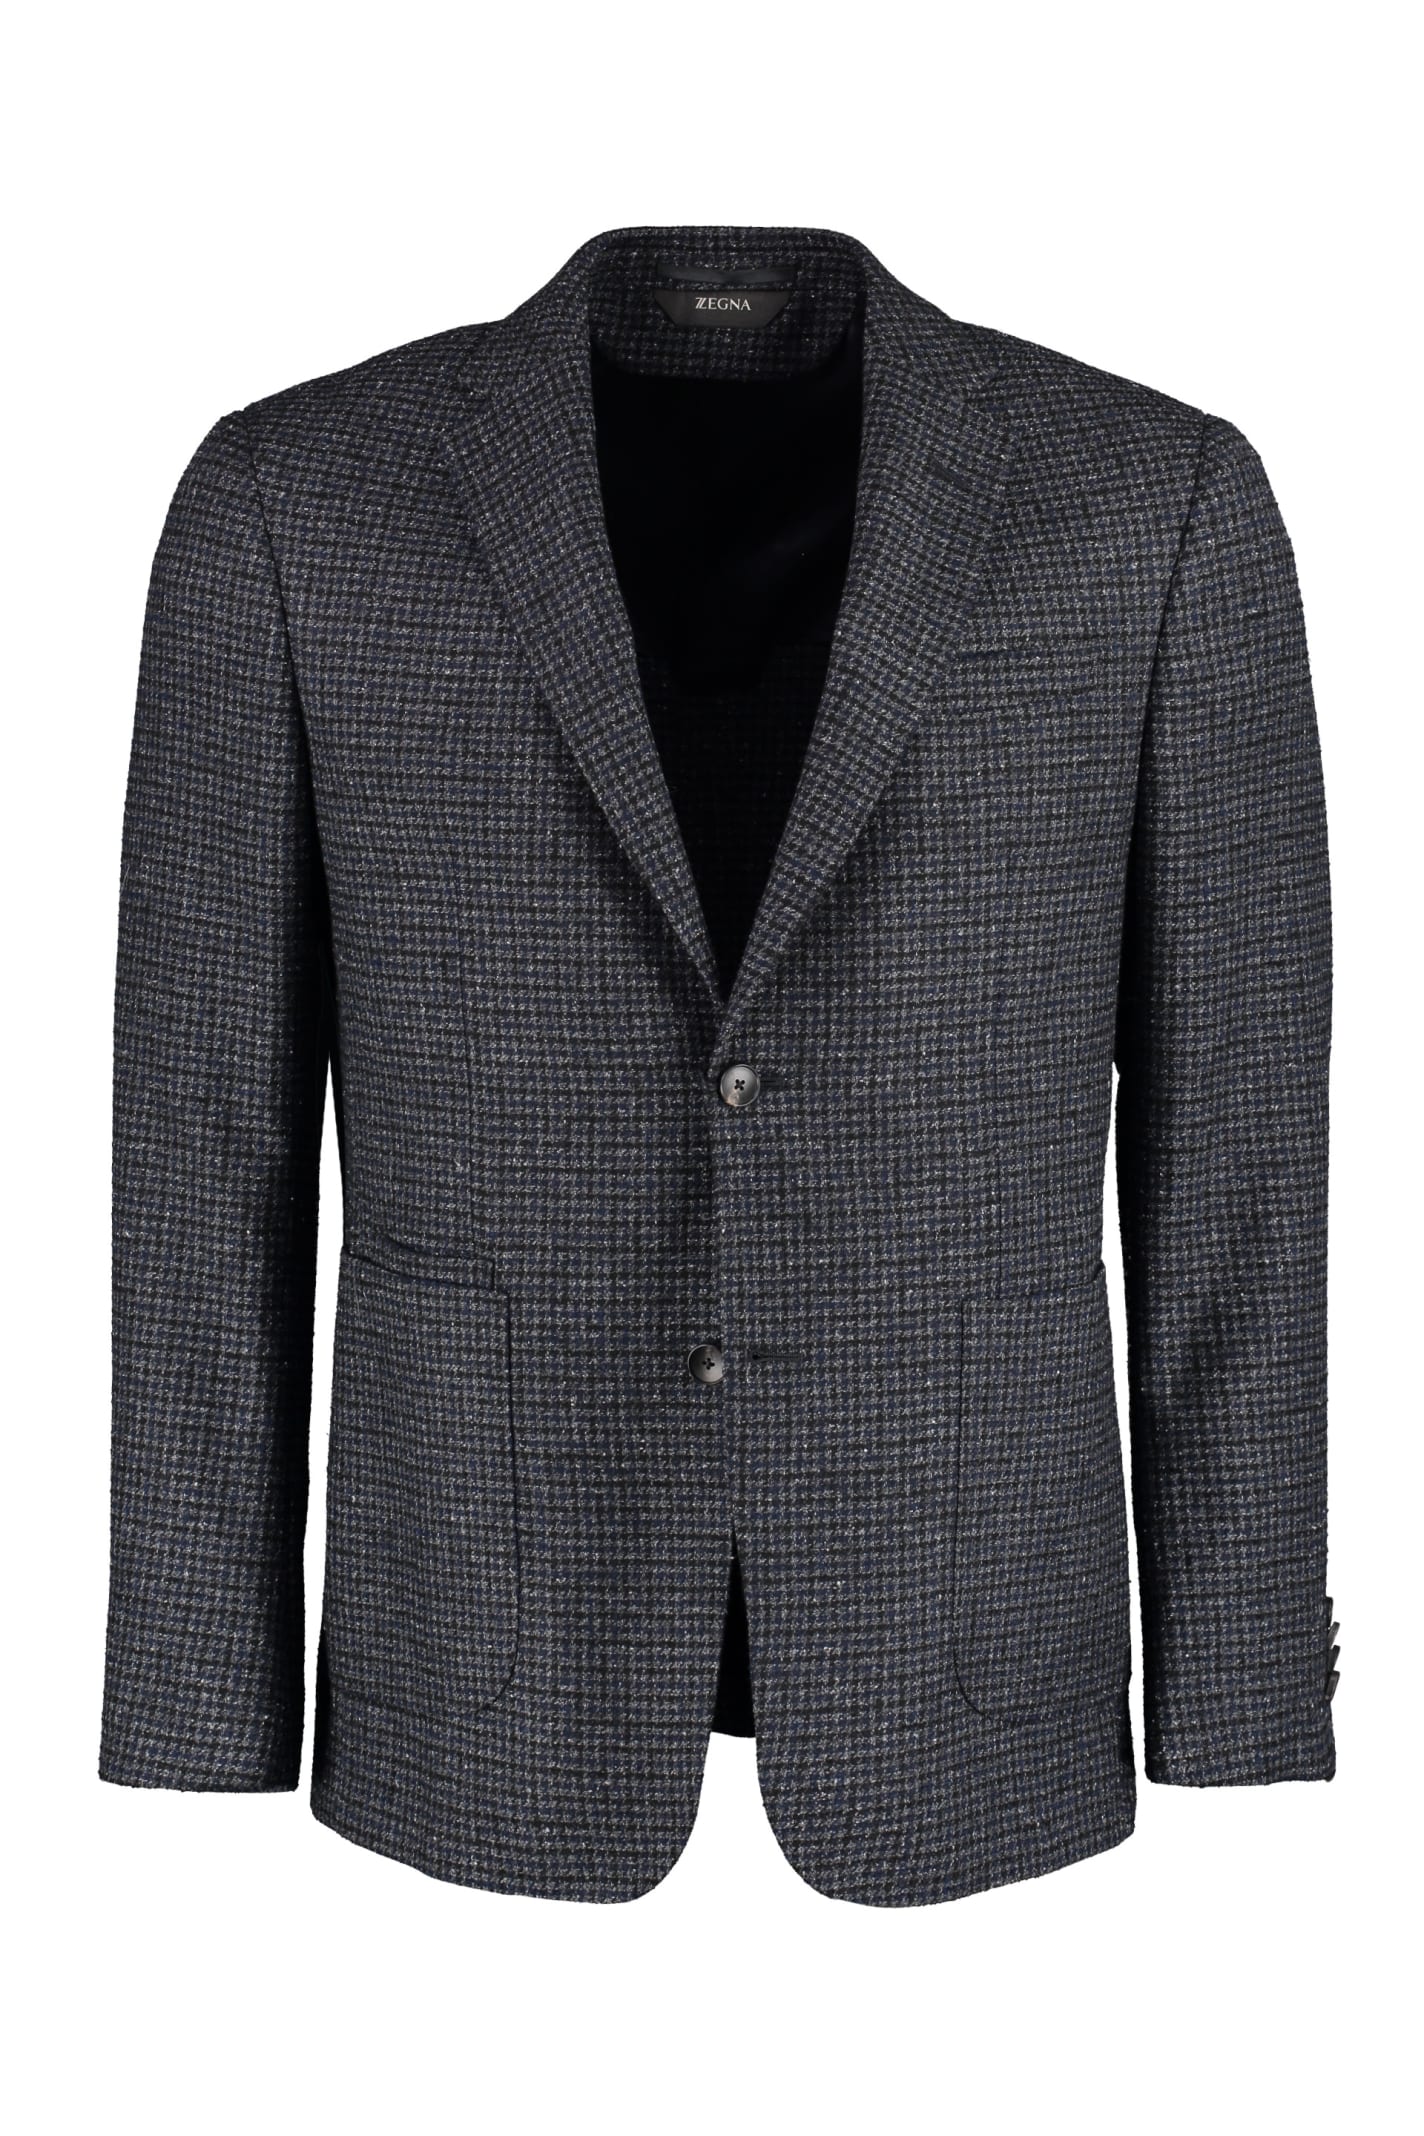 Z Zegna Single-breasted Two-button Jacket